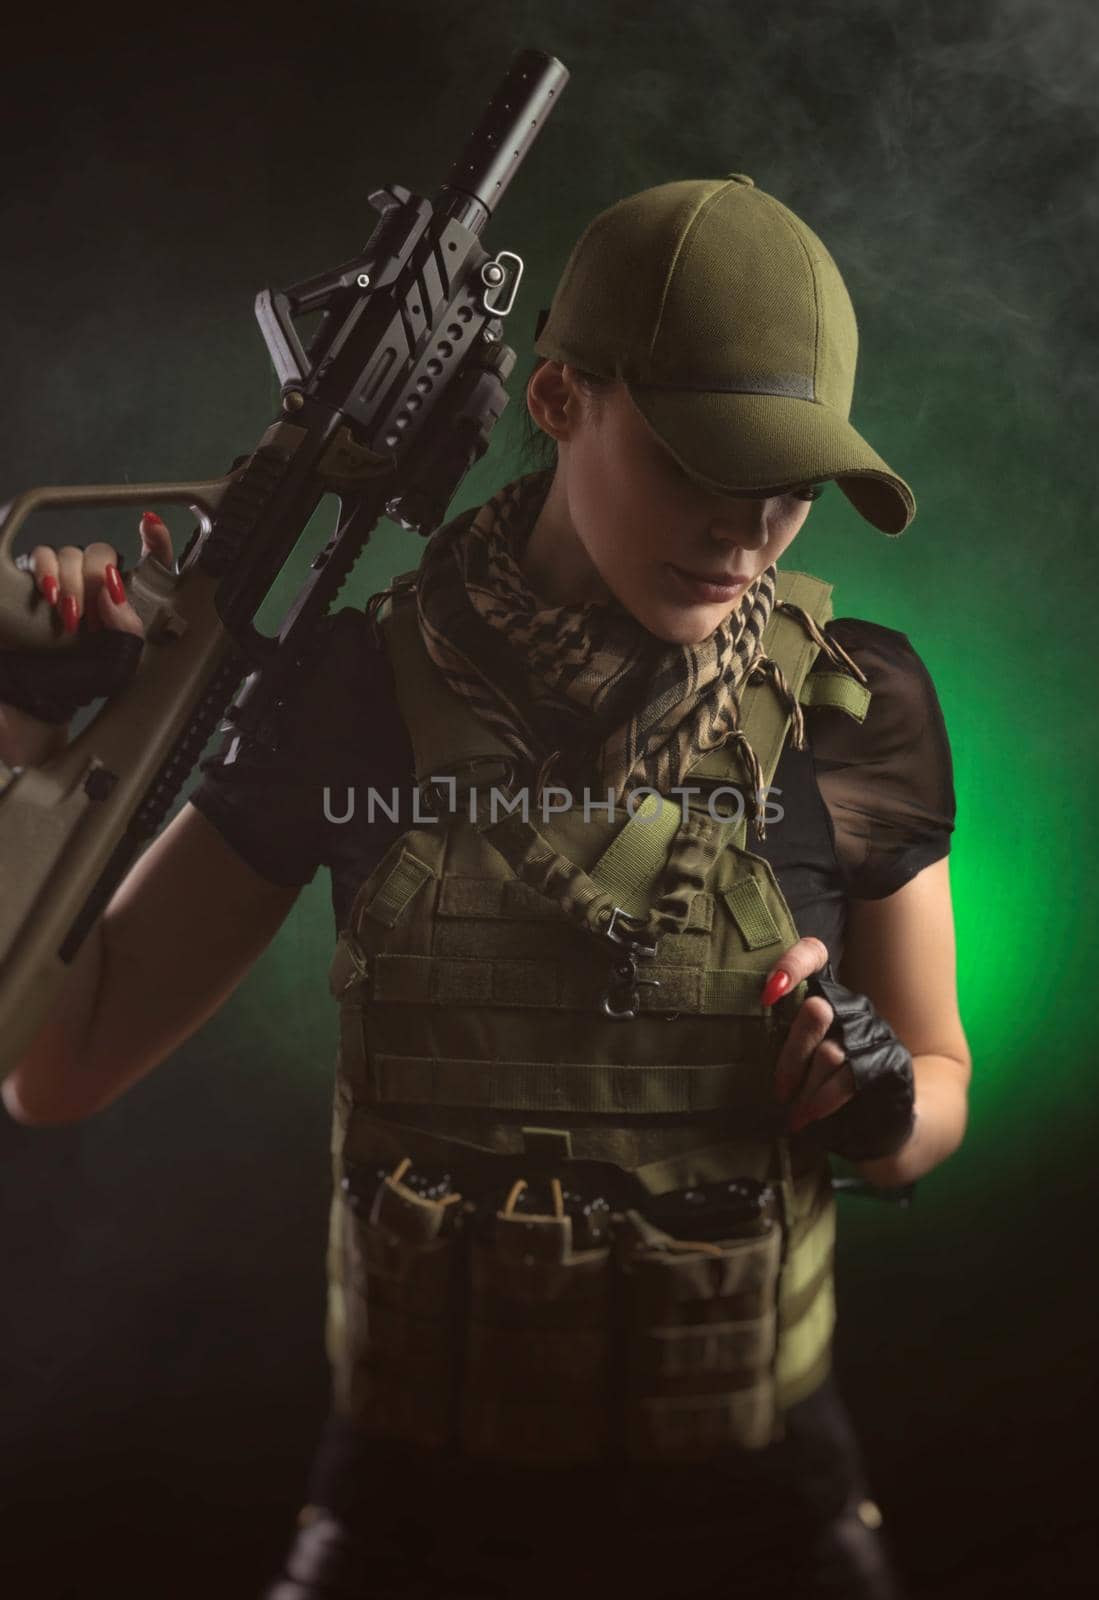 girl in military special clothes posing with a gun in his hands on a dark background in the haze